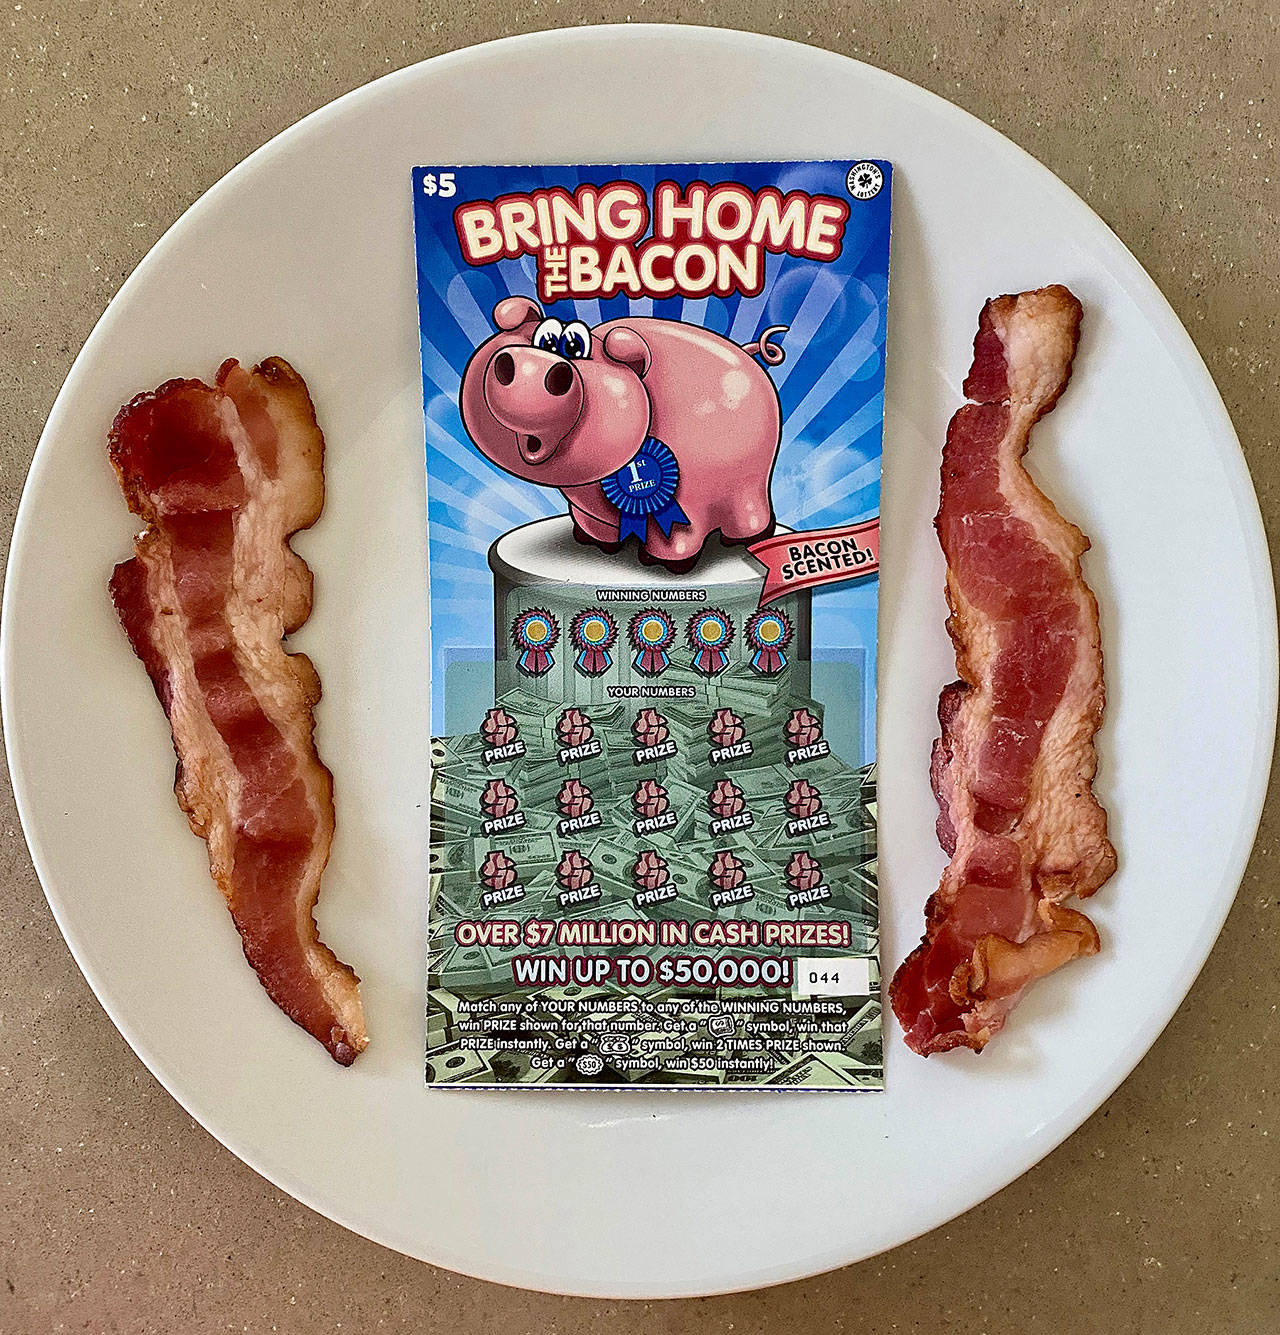 Bring Home the Bacon is a new $5 bacon-scented scratch ticket by Washington’s Lottery. (Andrea Brown / The Herald )